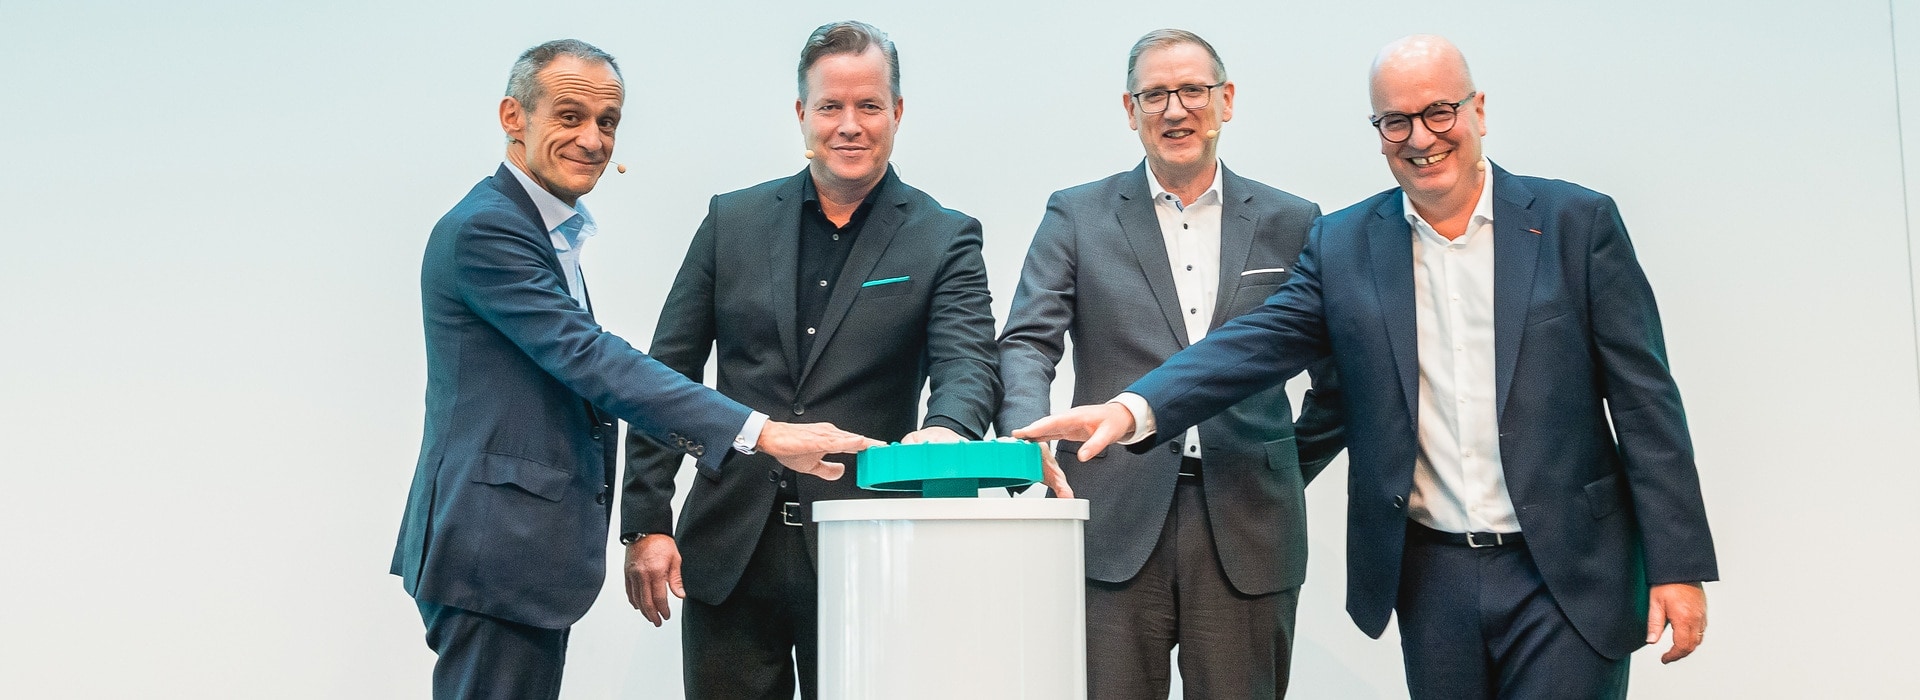 The grand opening of the H2Powerplant. In the picture from left to right: Jean-Pascal Tricoire (President & CEO of Schneider Electric), Oliver Hermes (President & CEO of the Wilo Group), Georg Weber (Chief Technology Officer of the Wilo Group) and Christophe De Maistre (DACH Zone President of Schneider Electric). Source: WILO SE